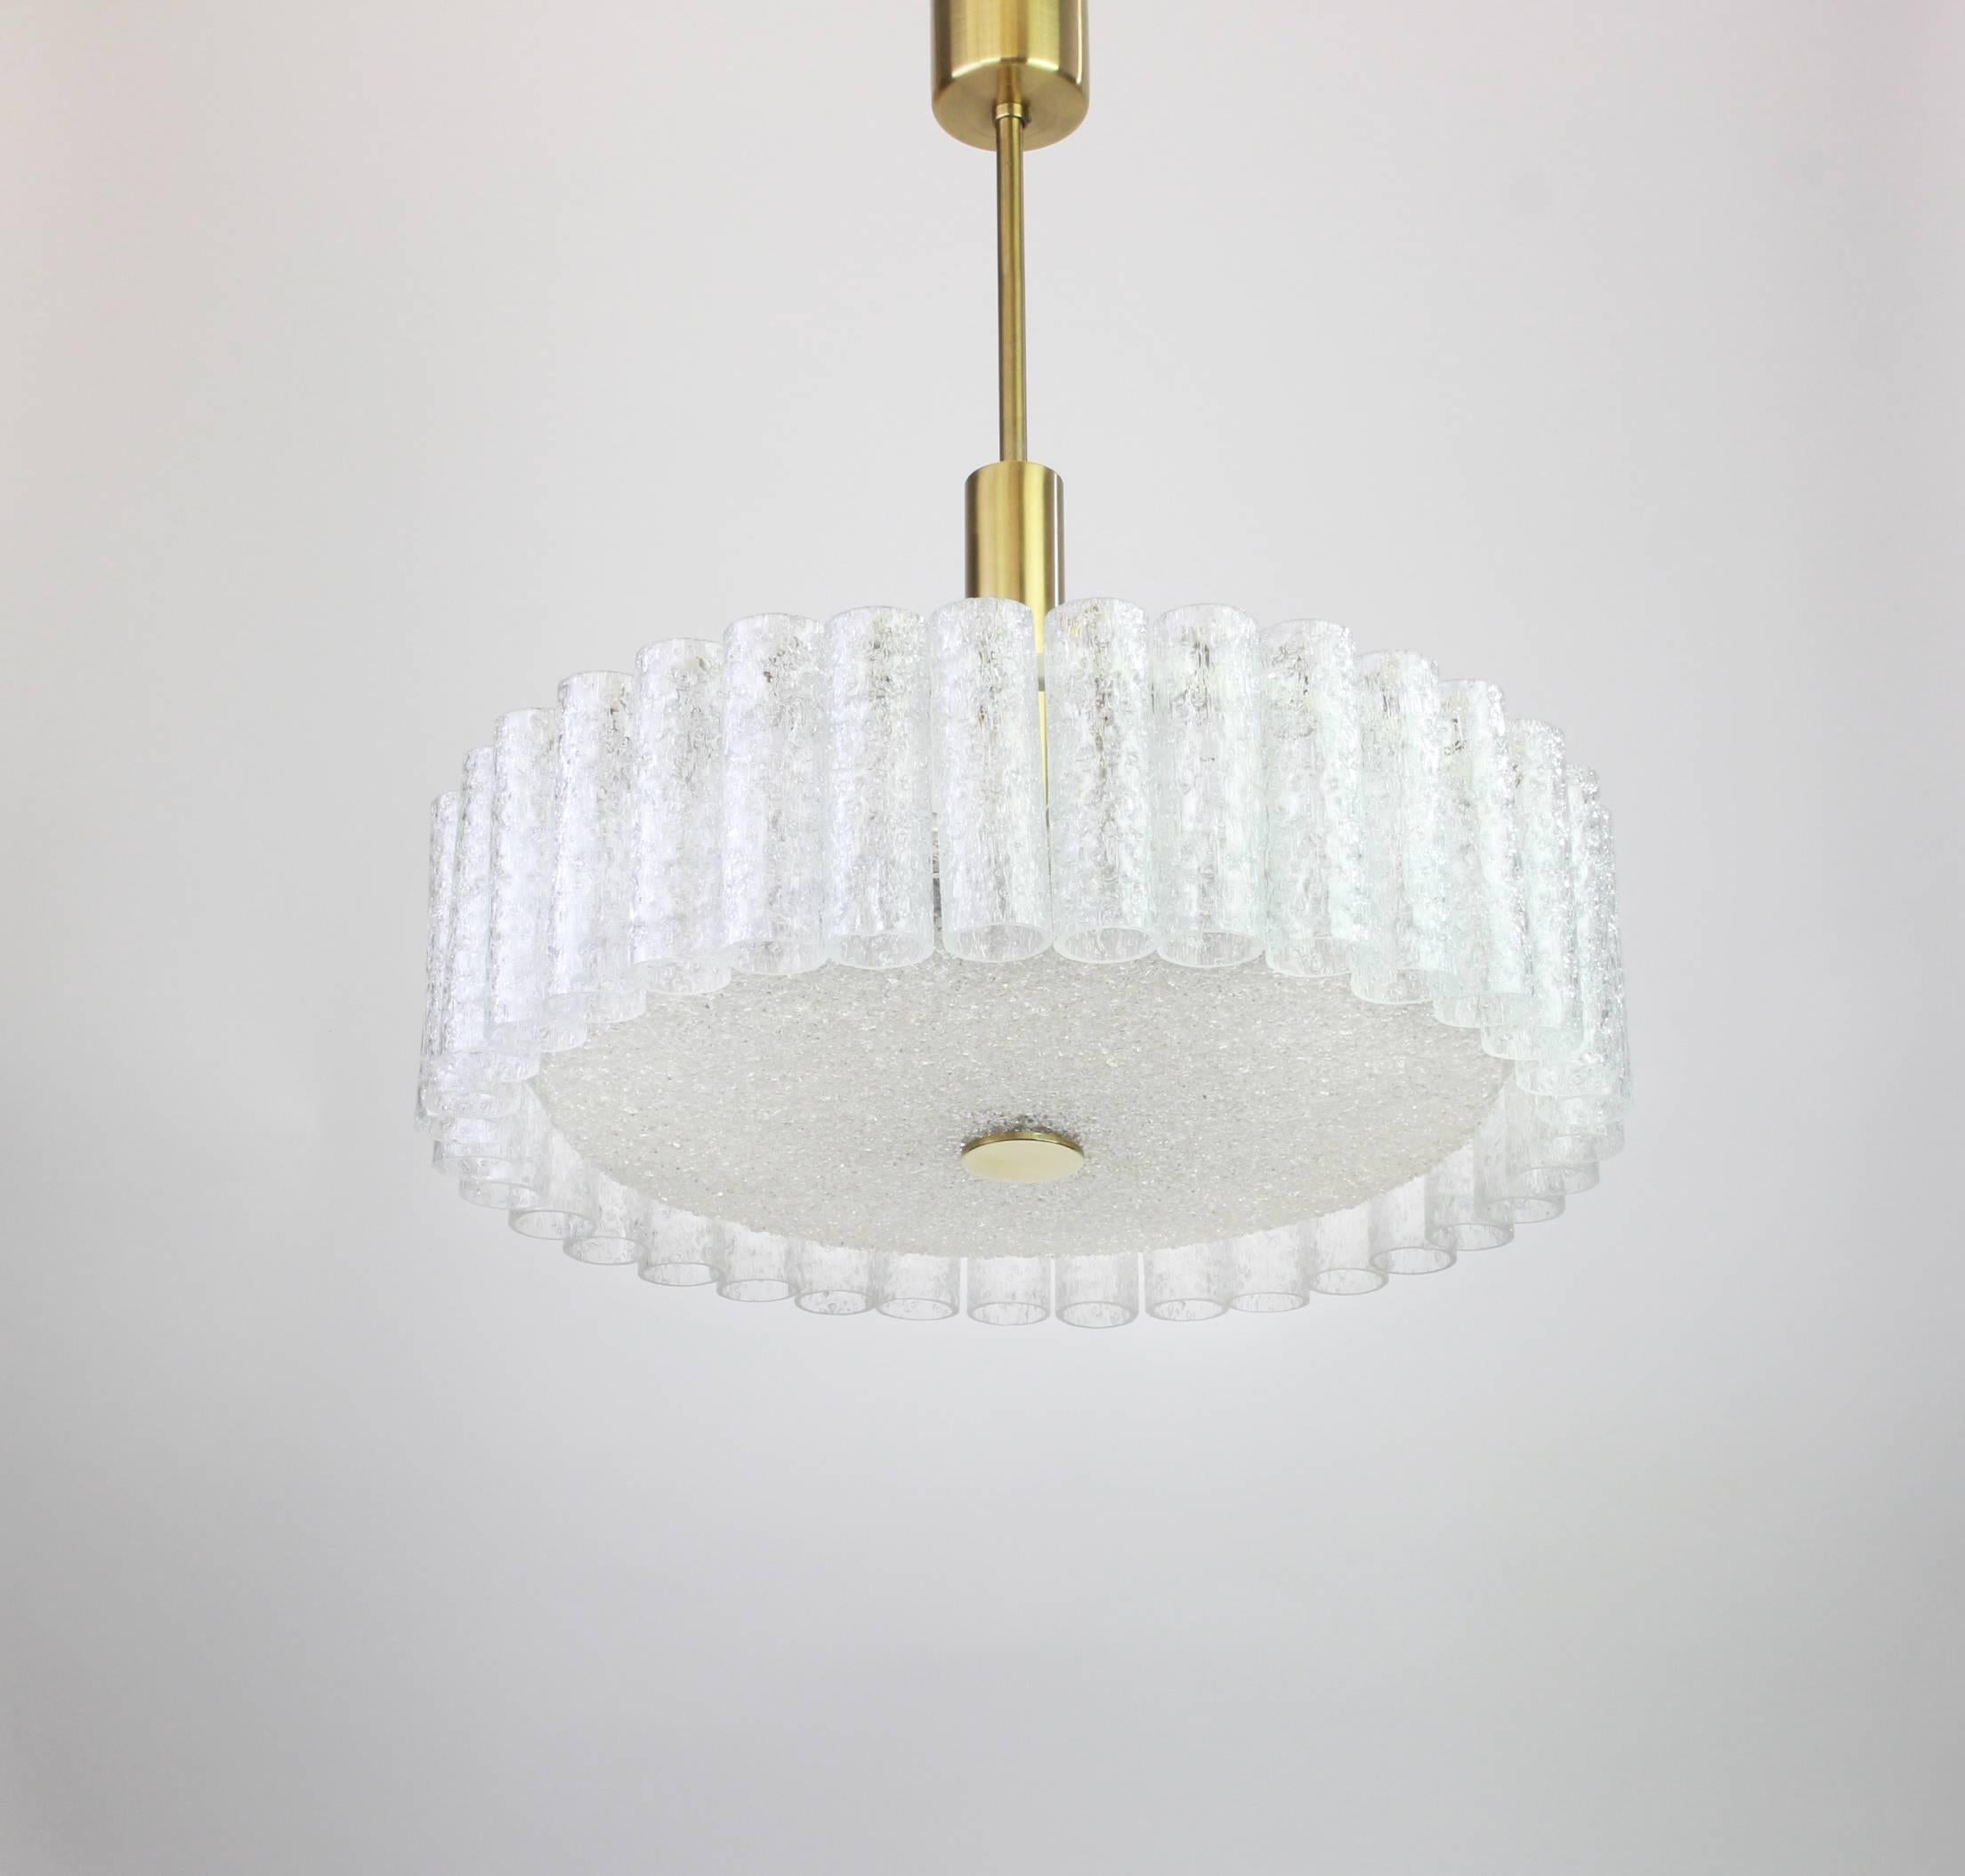 Fantastic Midcentury chandelier by Doria, Germany, manufactured circa 1970-1979, with 35 Murano glass cylinders suspended from a fixture.

High quality and in very good condition. Cleaned, well-wired and ready to use. 

The fixture requires 6 x E27